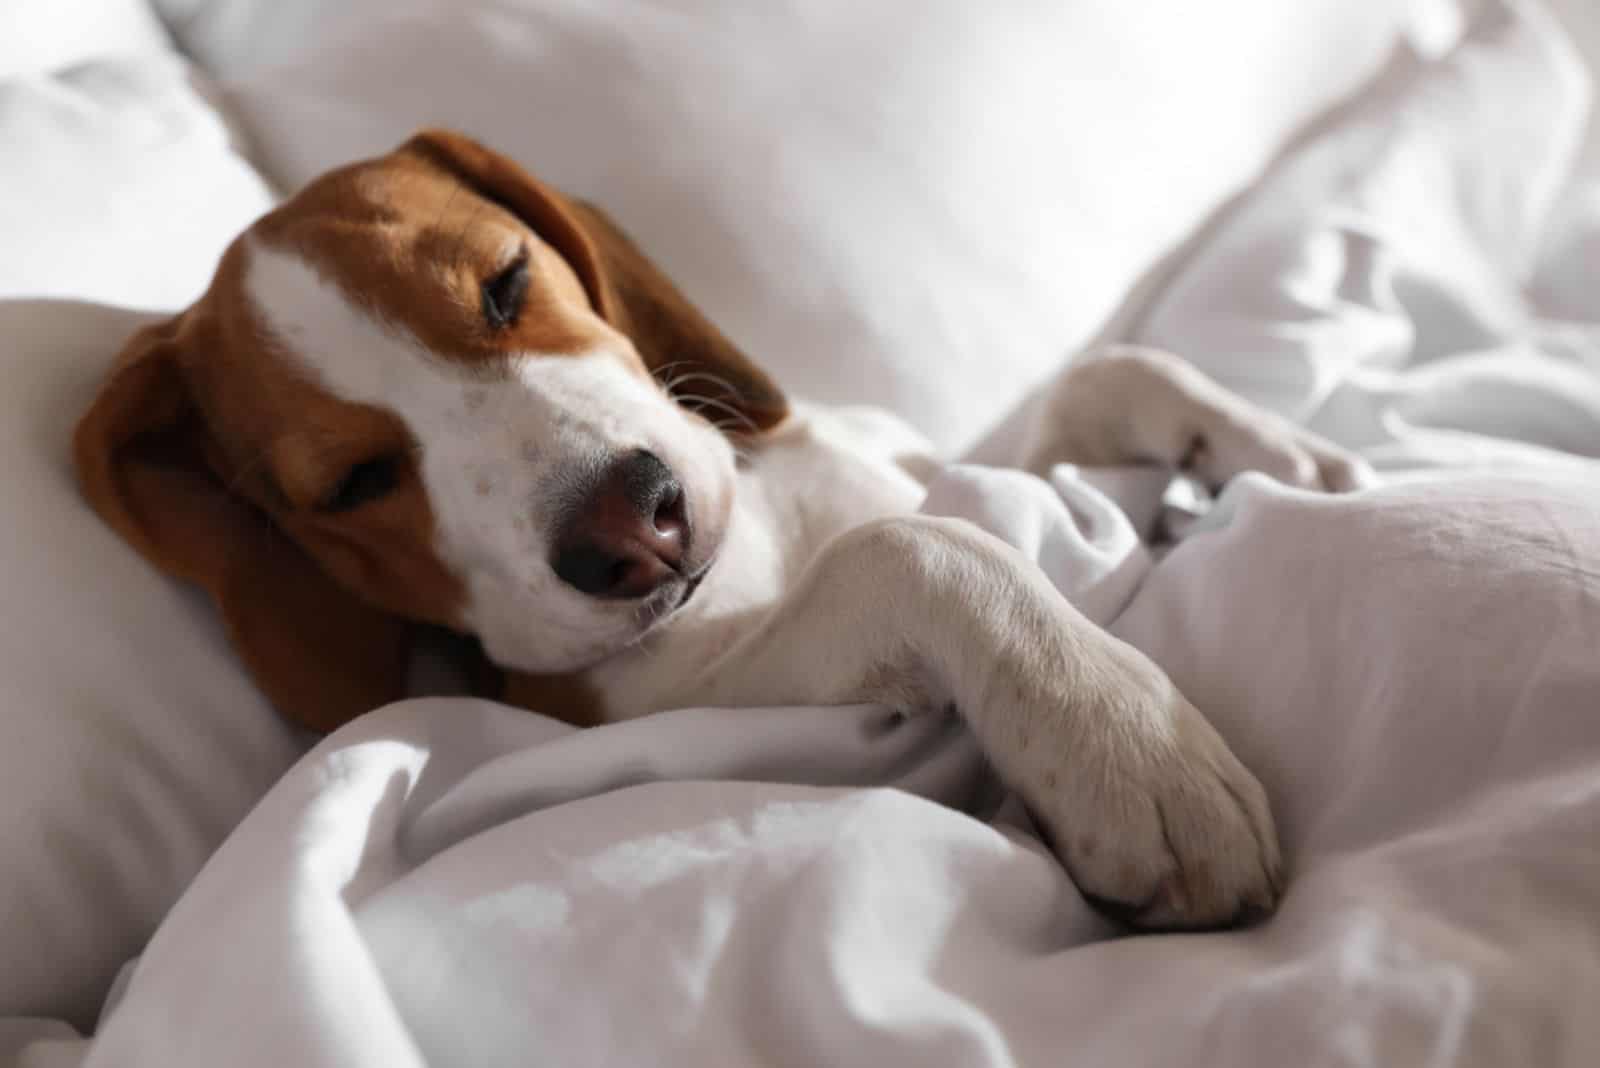 Cute Beagle puppy sleeping in bed